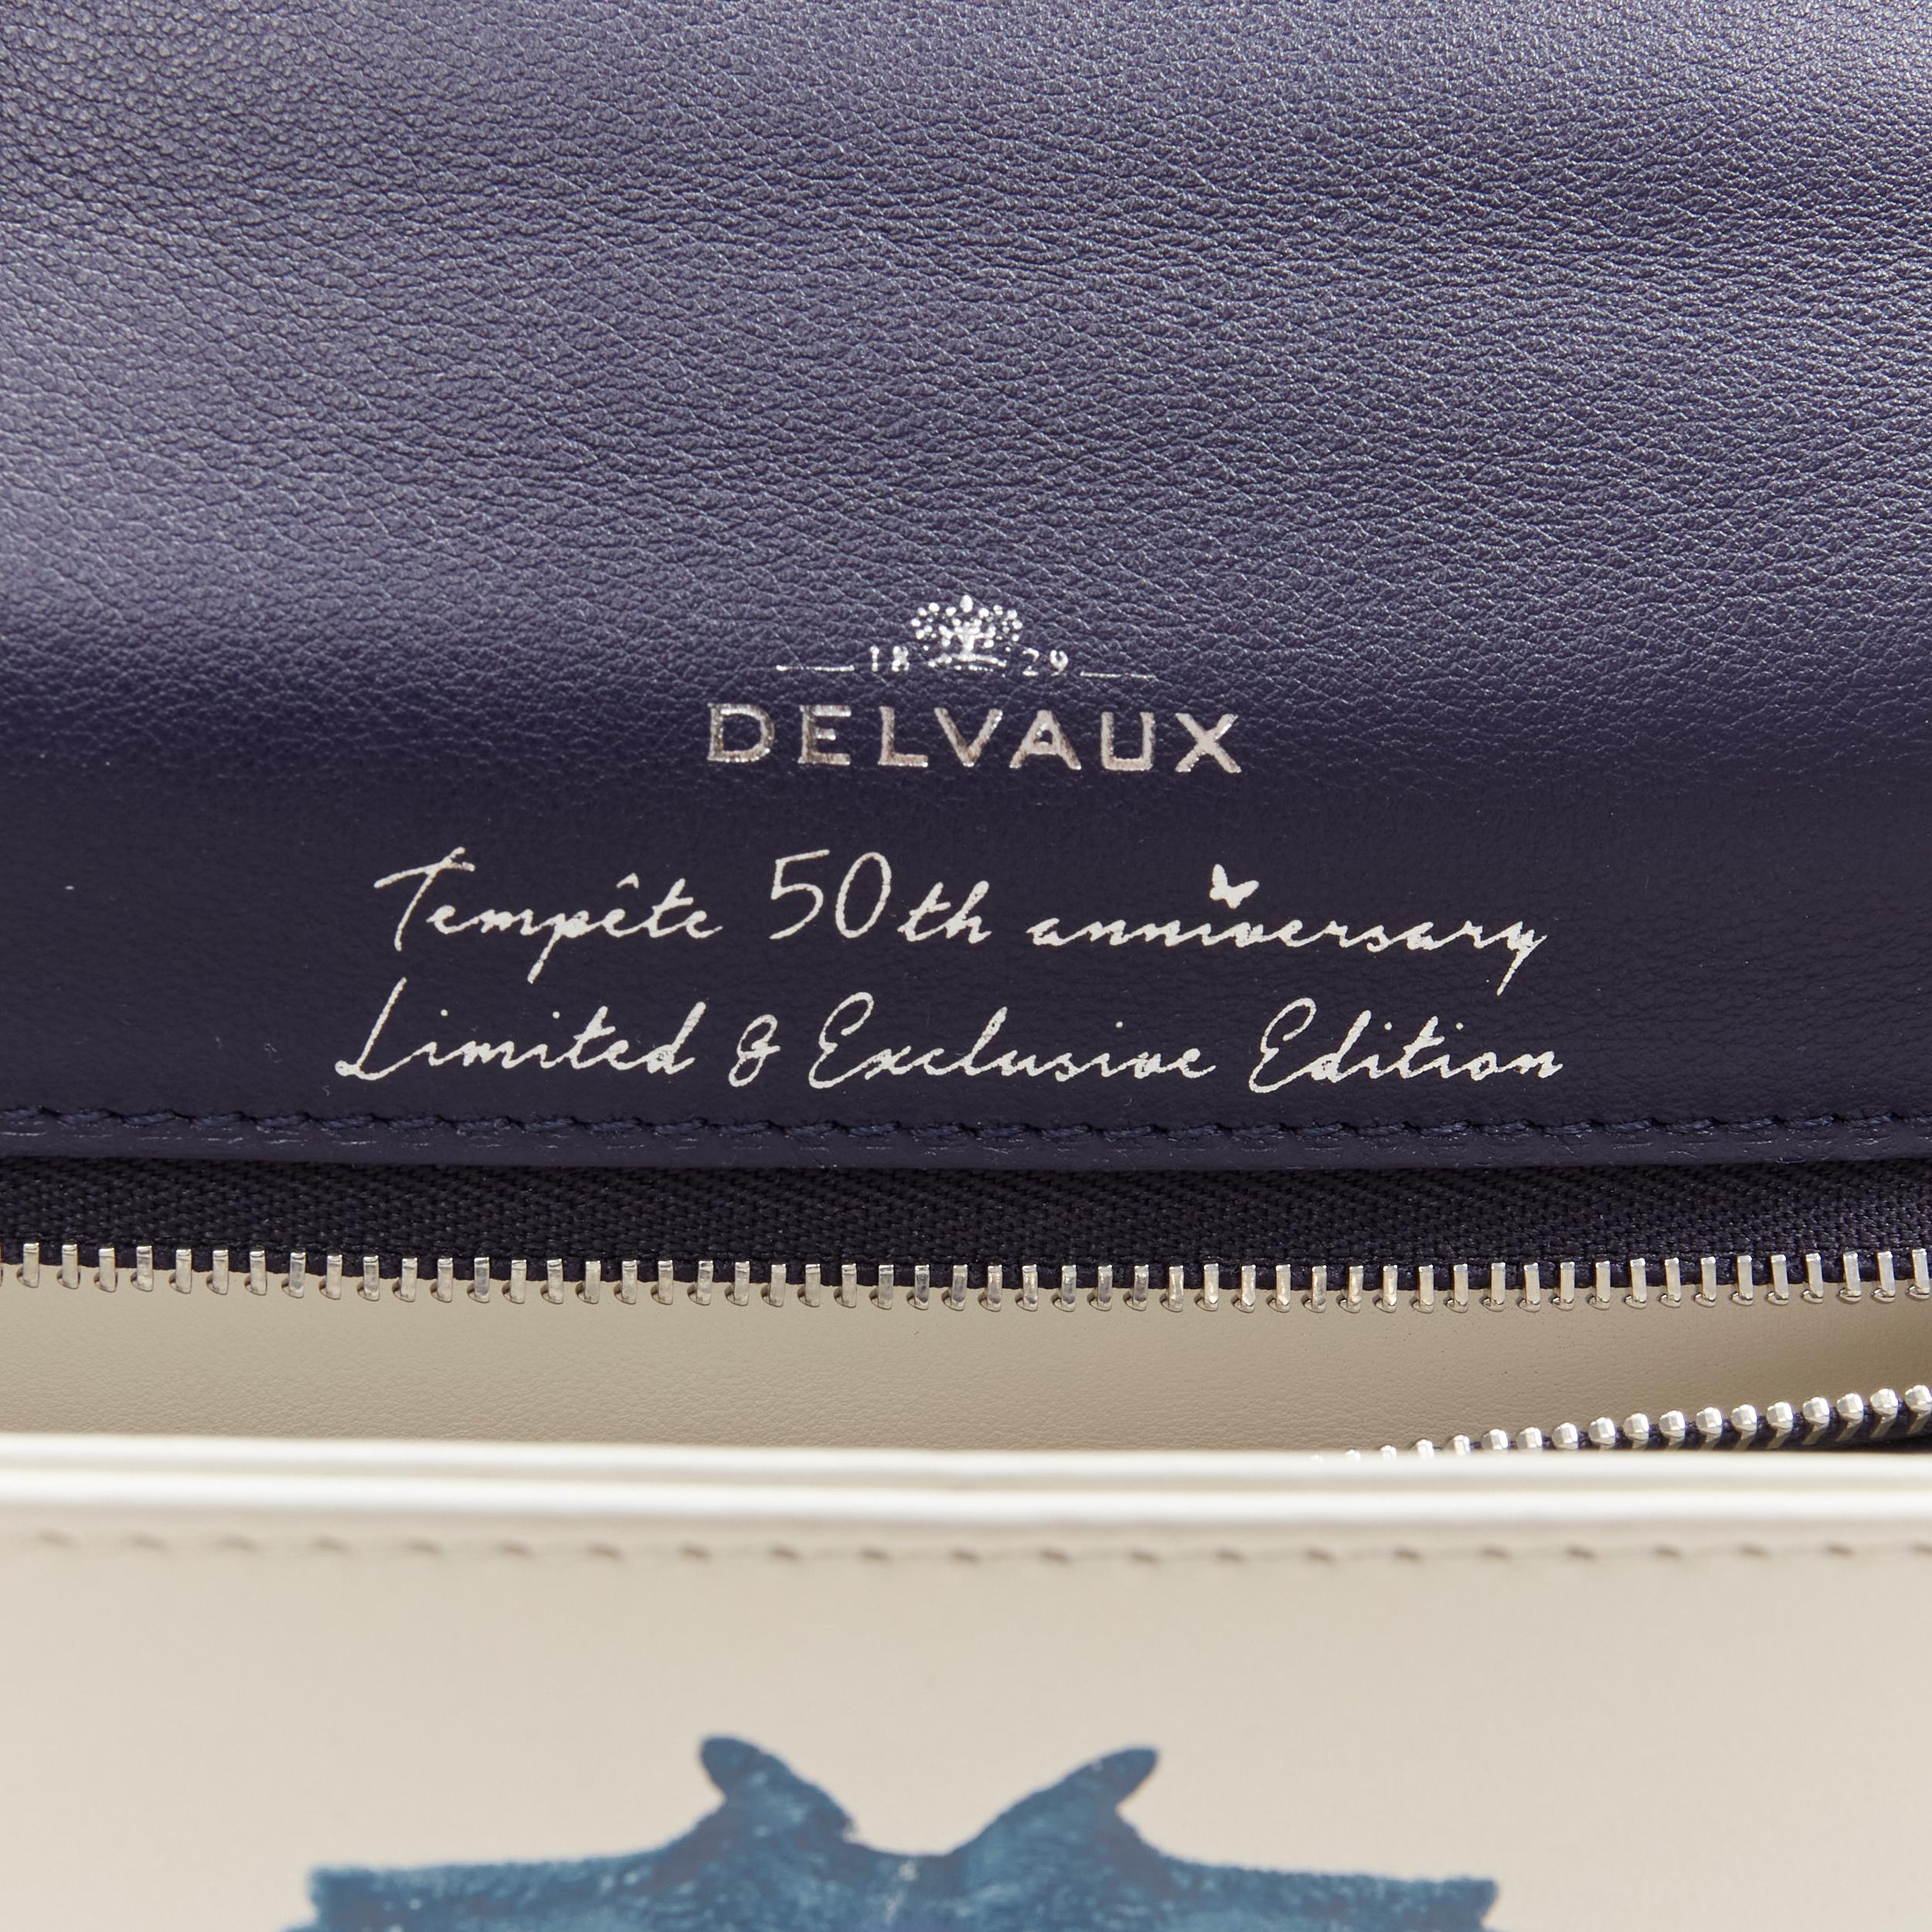 rare DELVAUX 2017 Limited Edition Tempete MM B Papillon lambskin leather bag For Sale 4